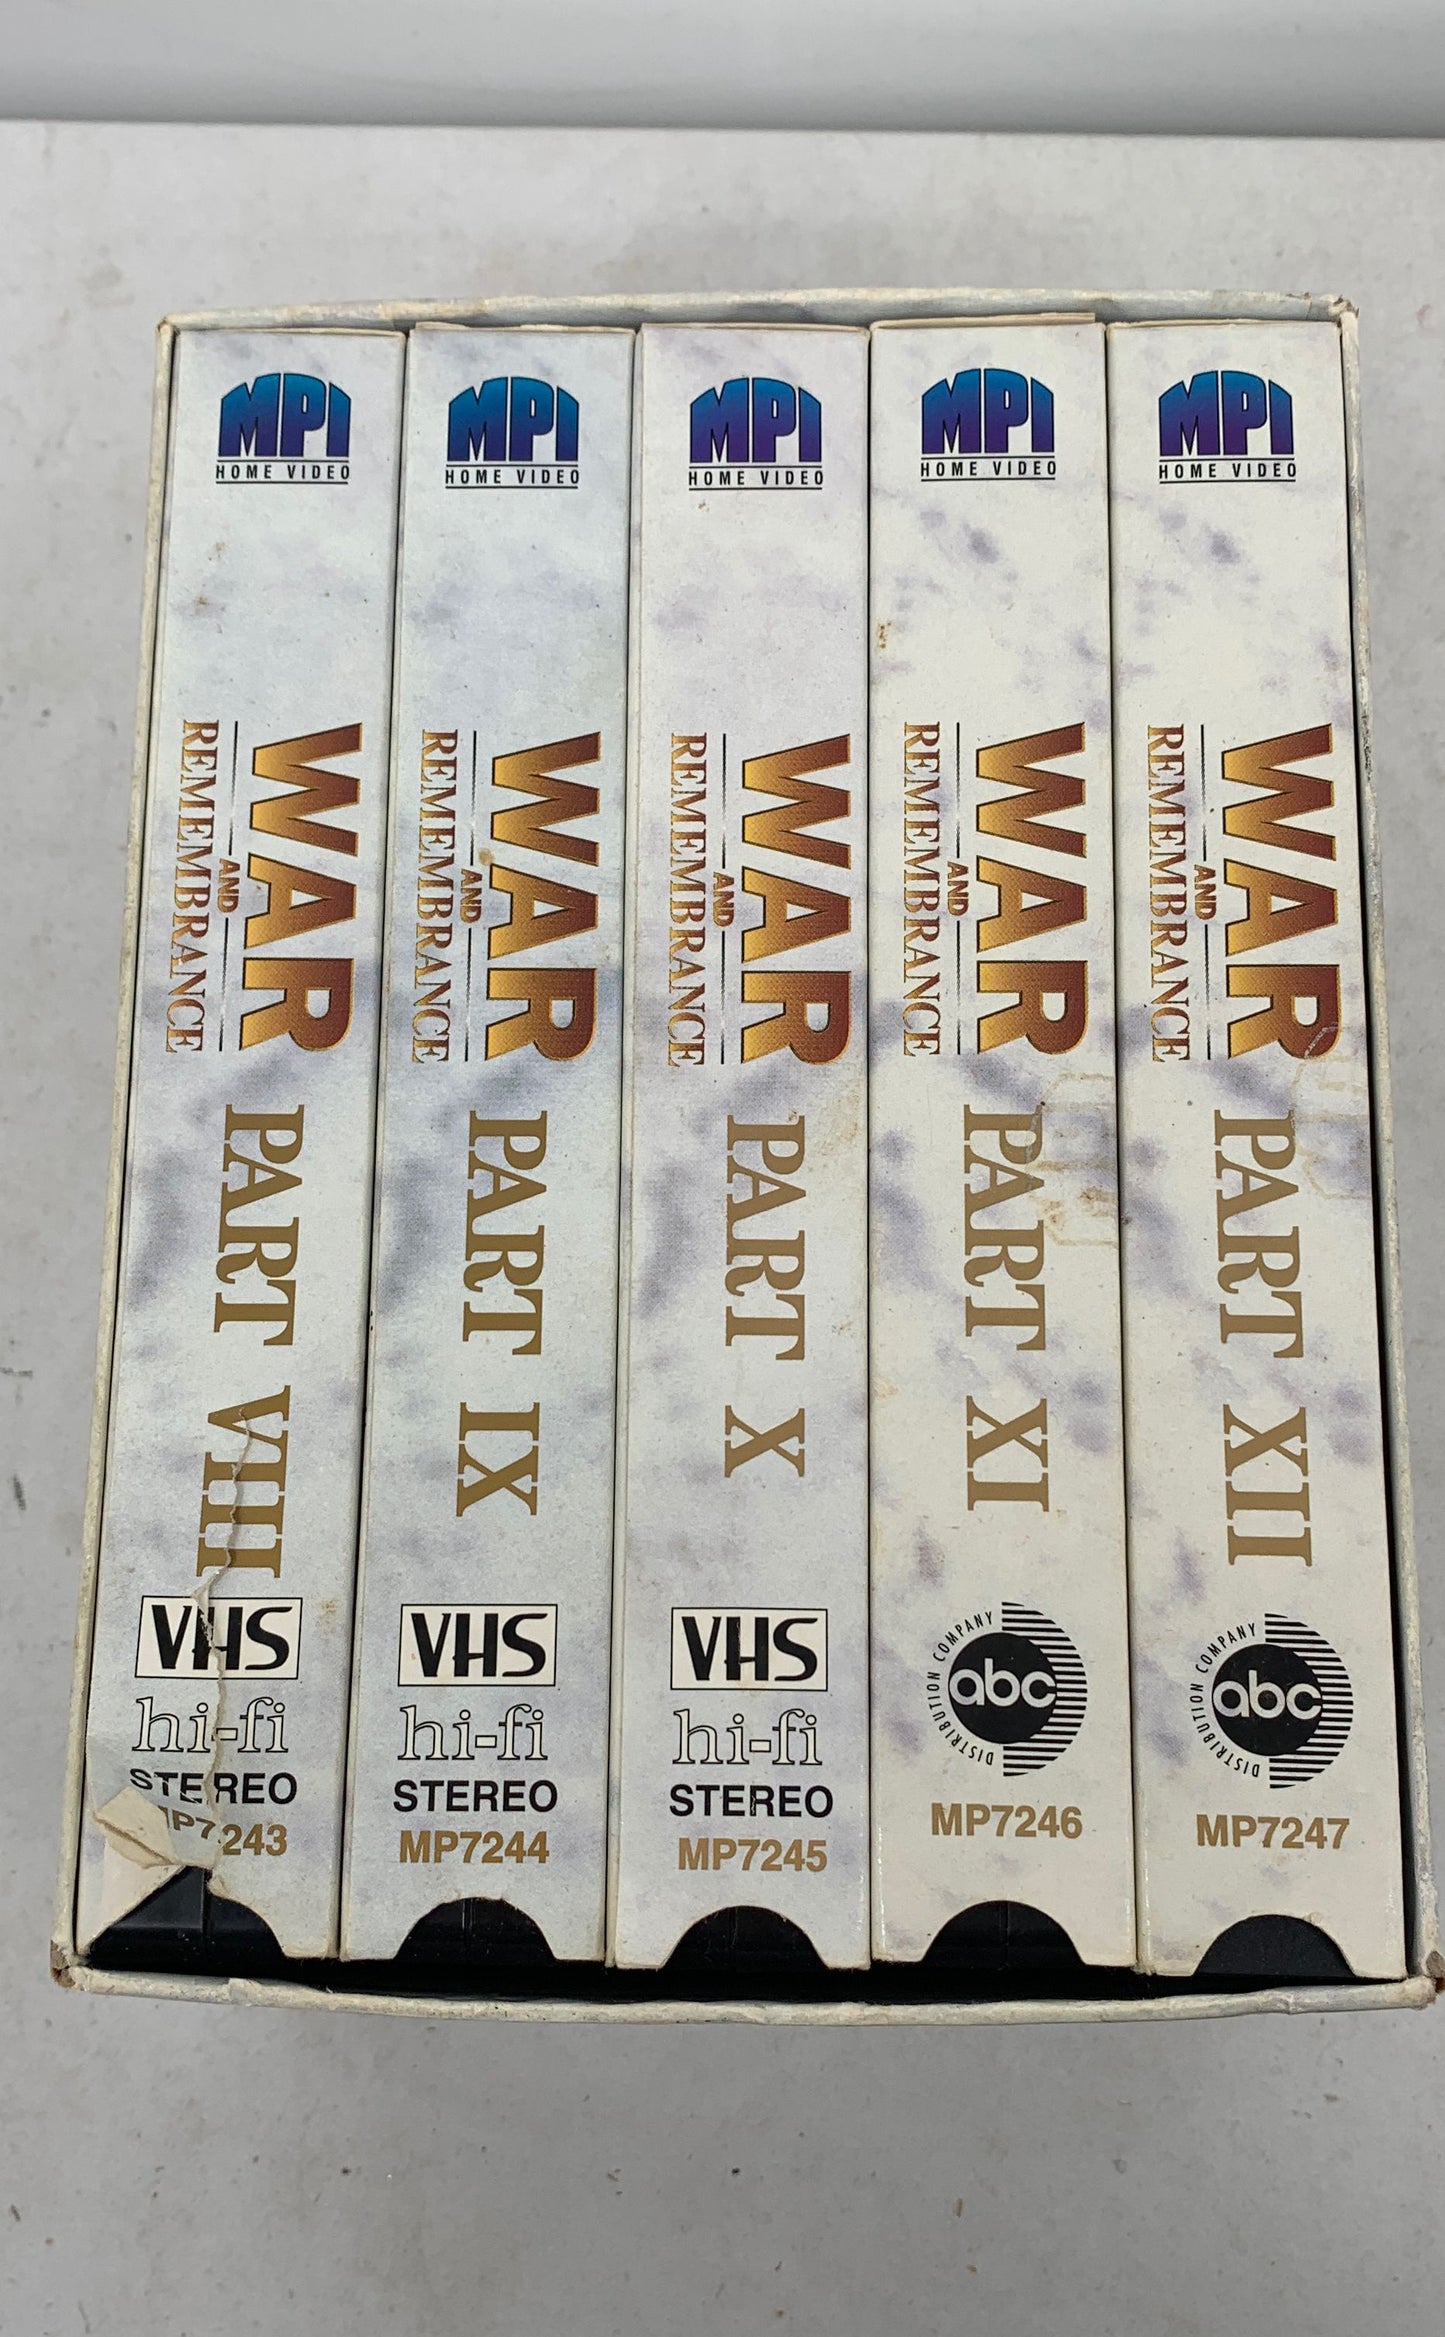 Herman Wouk's War And Remembrance VHS Complete Set Lot Parts 1 & 2 1-7 & 8-12